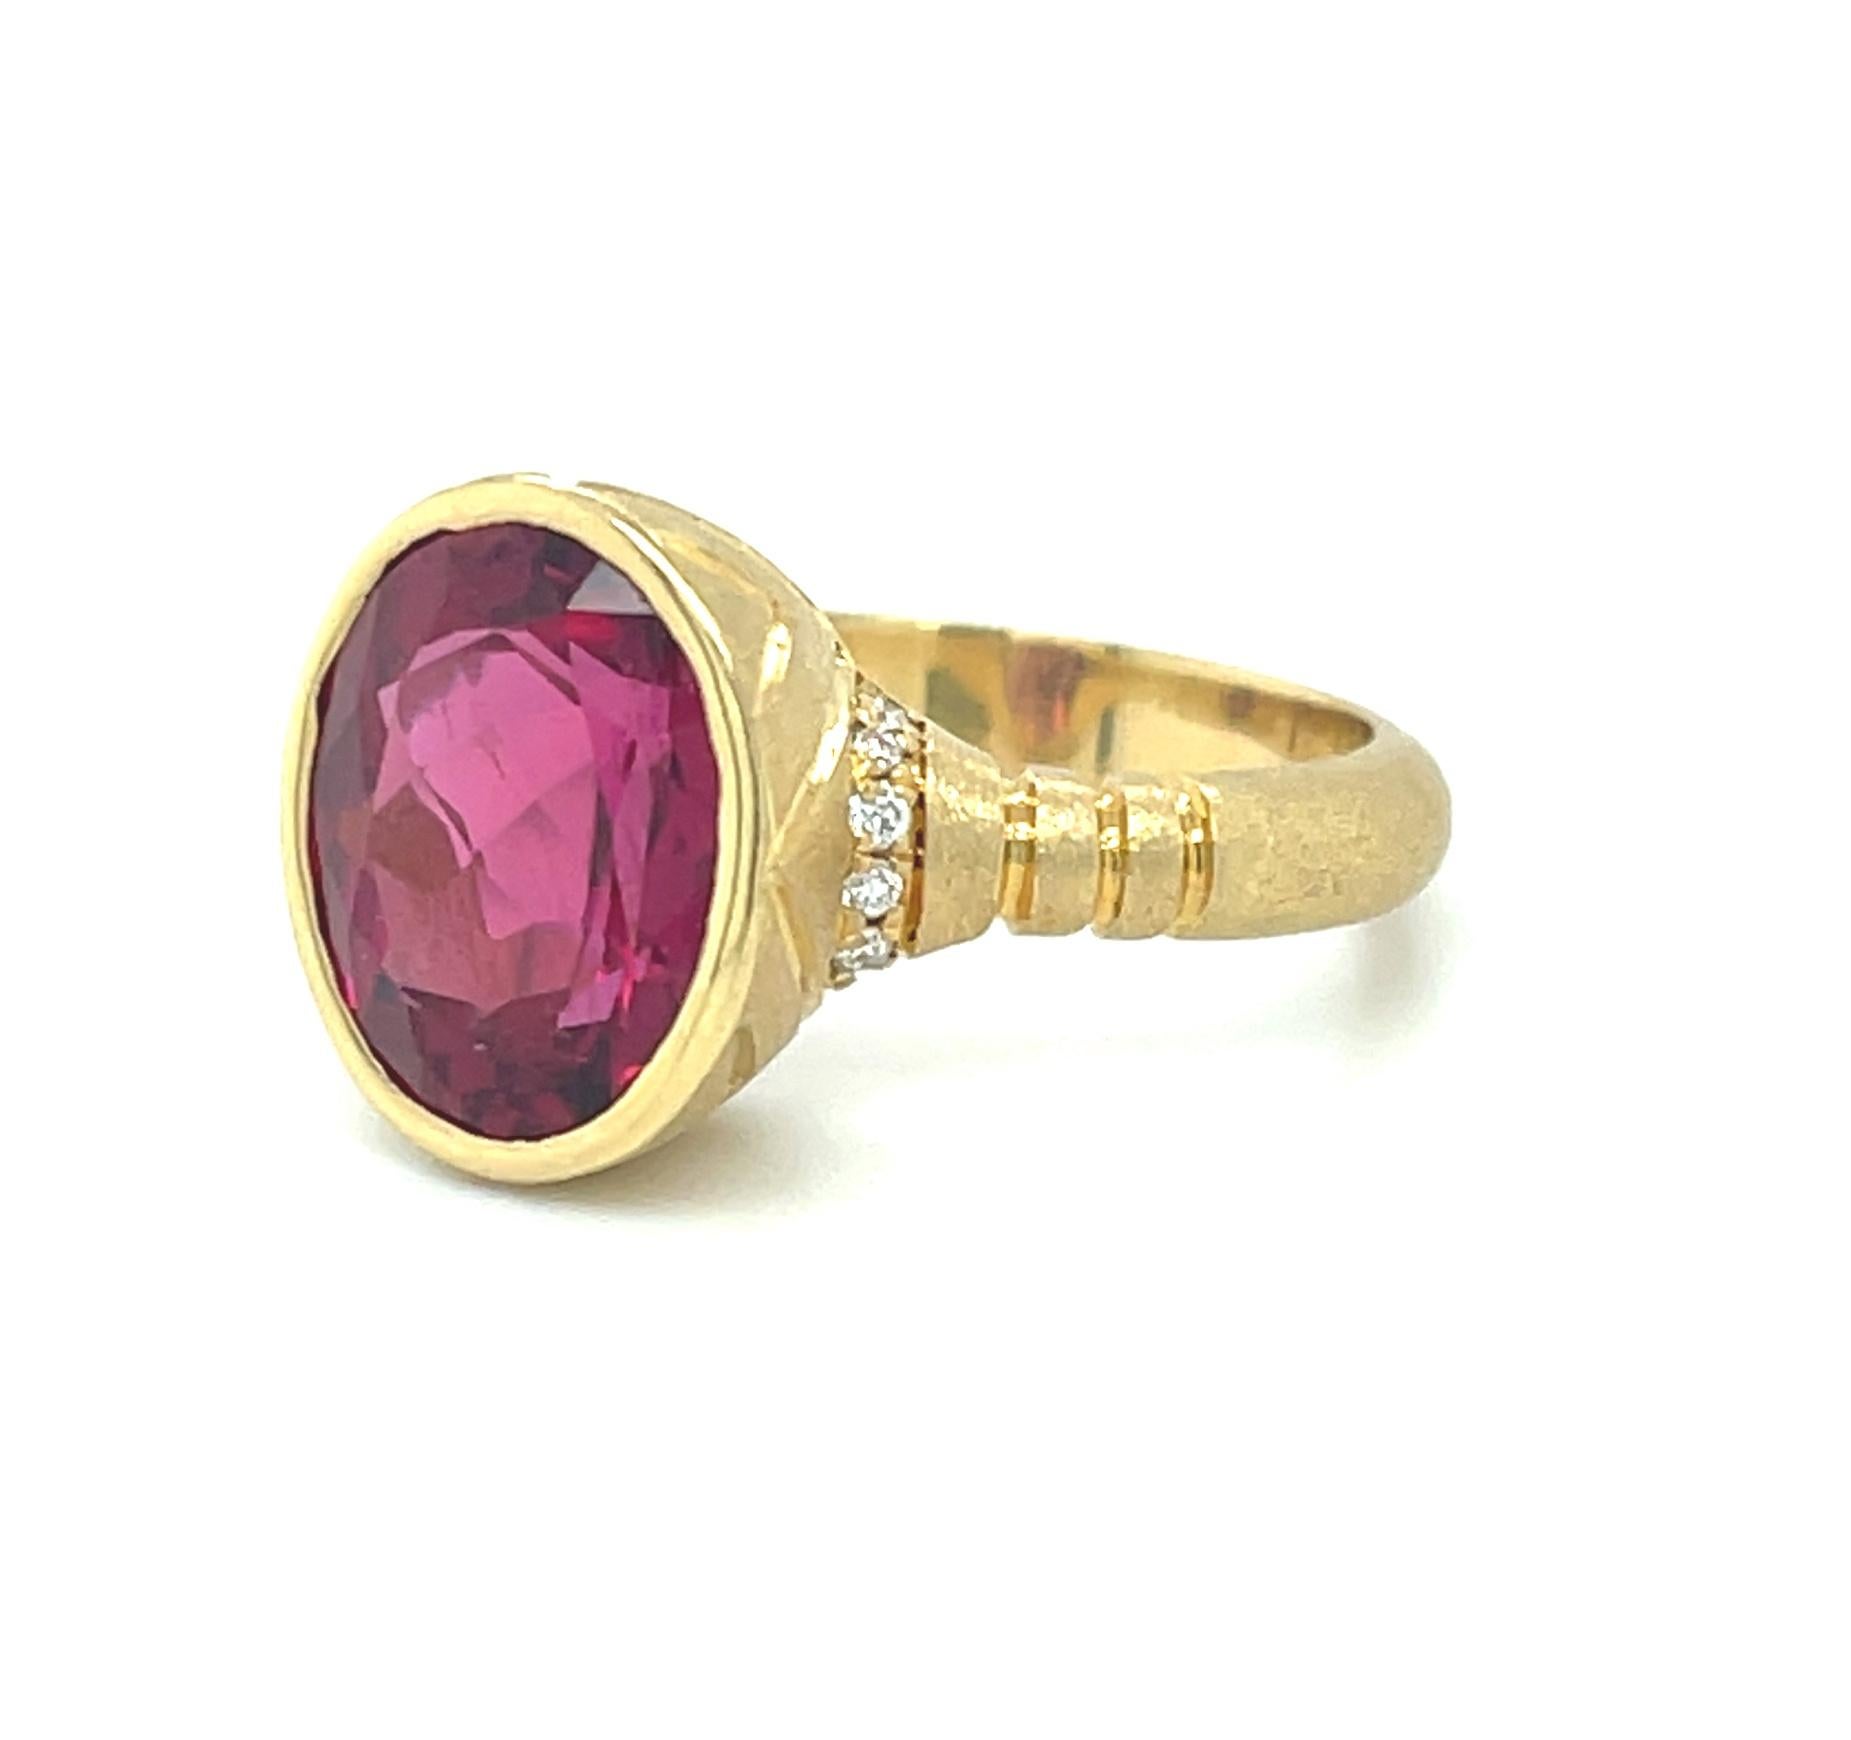 5.35 Carat Rubellite Tourmaline and Diamond Band Ring in 18k Yellow Gold  For Sale 1